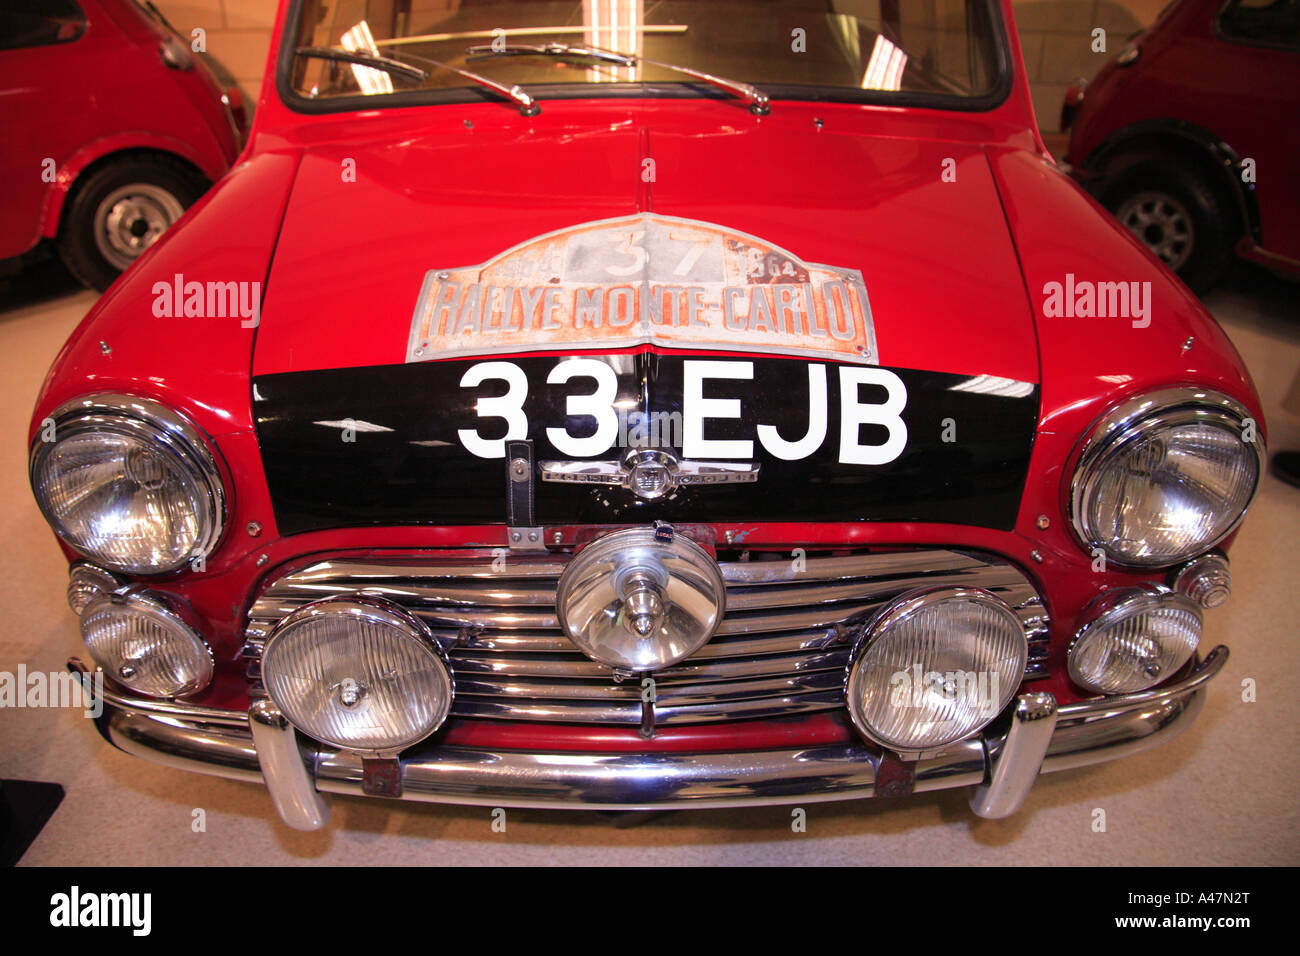 Morris Mini Cooper Monte Carlo Rallye rally Paddy Hopkirk red lights avant classic legend 33 voiture EJB motor sport course automobile Banque D'Images